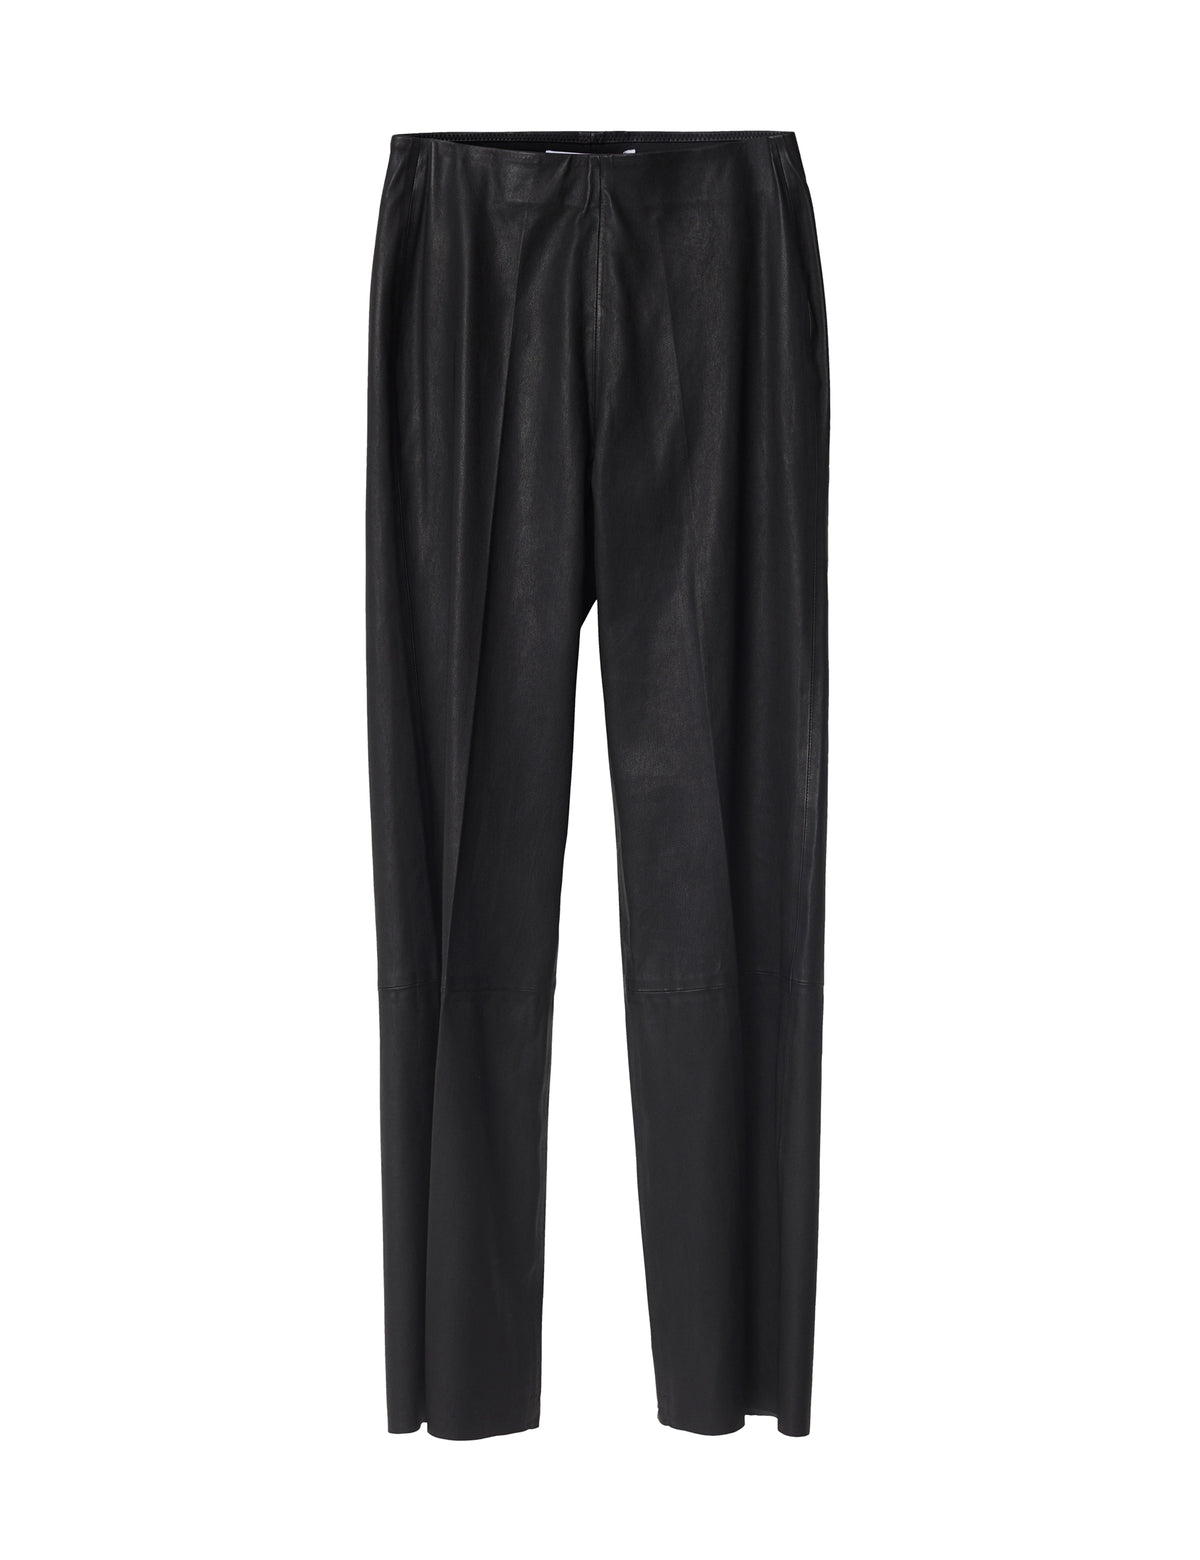 Pull on straight cut black leather trousers